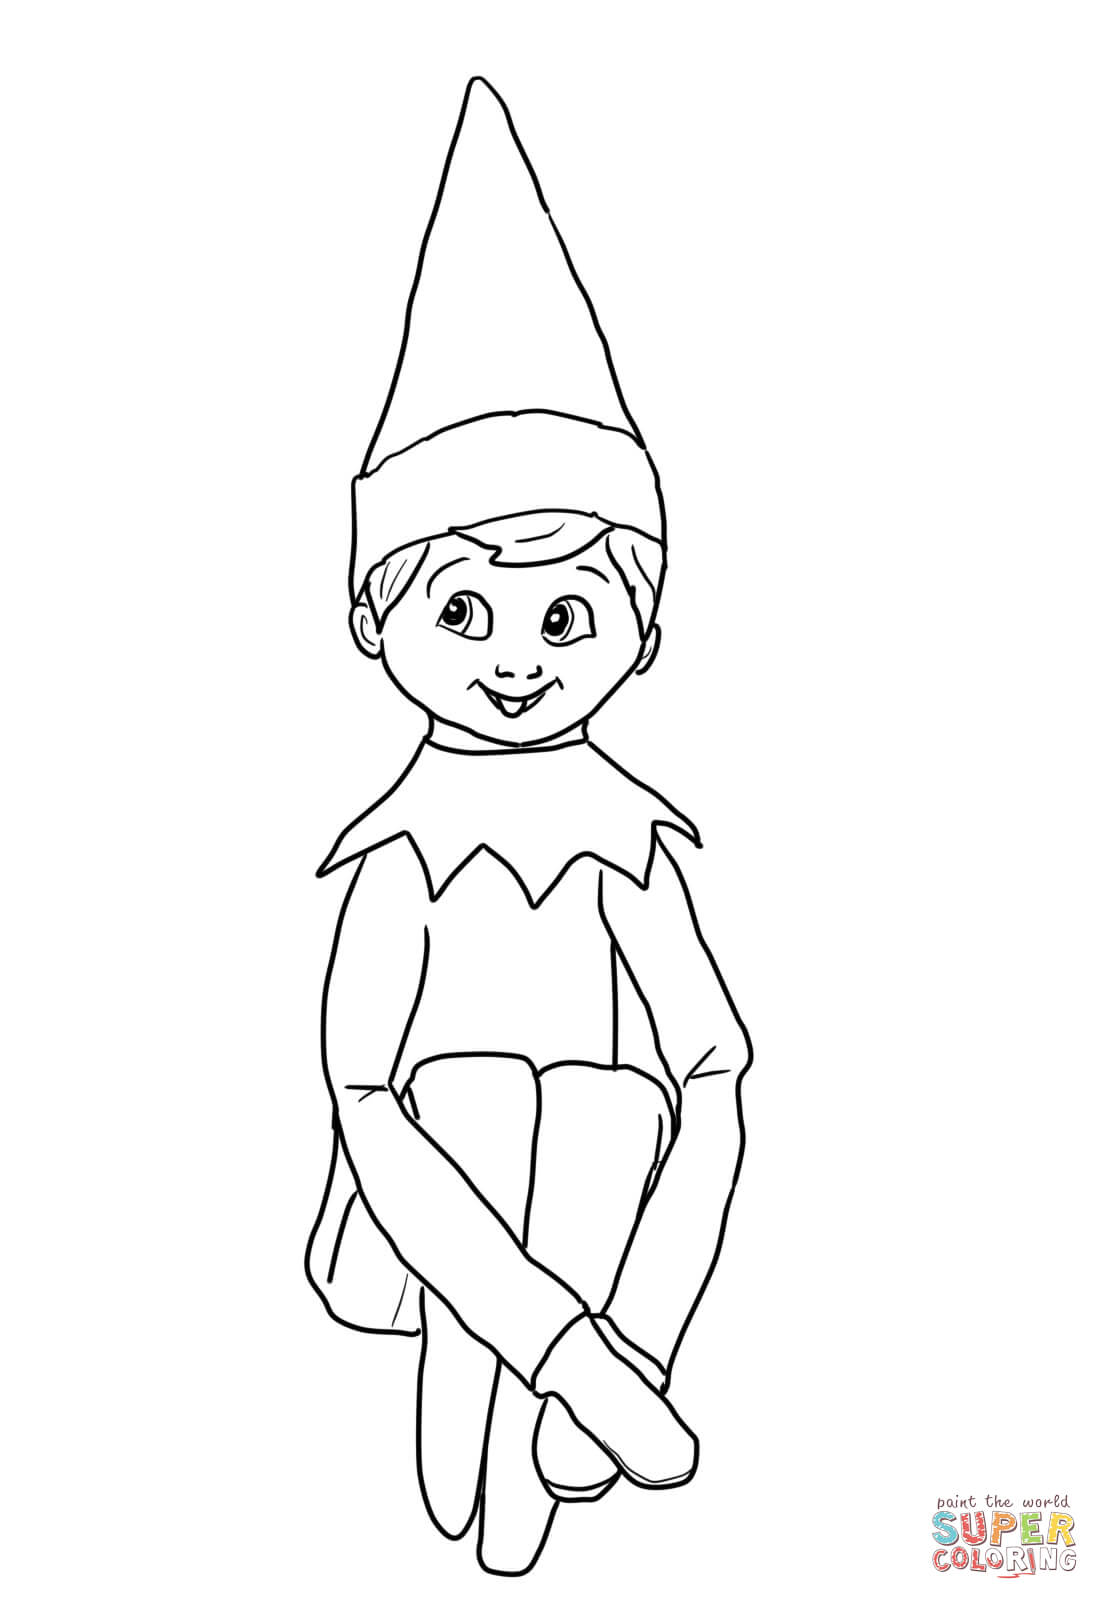 11-pics-of-elf-on-shelf-printable-coloring-pages-elf-on-the-coloring-home